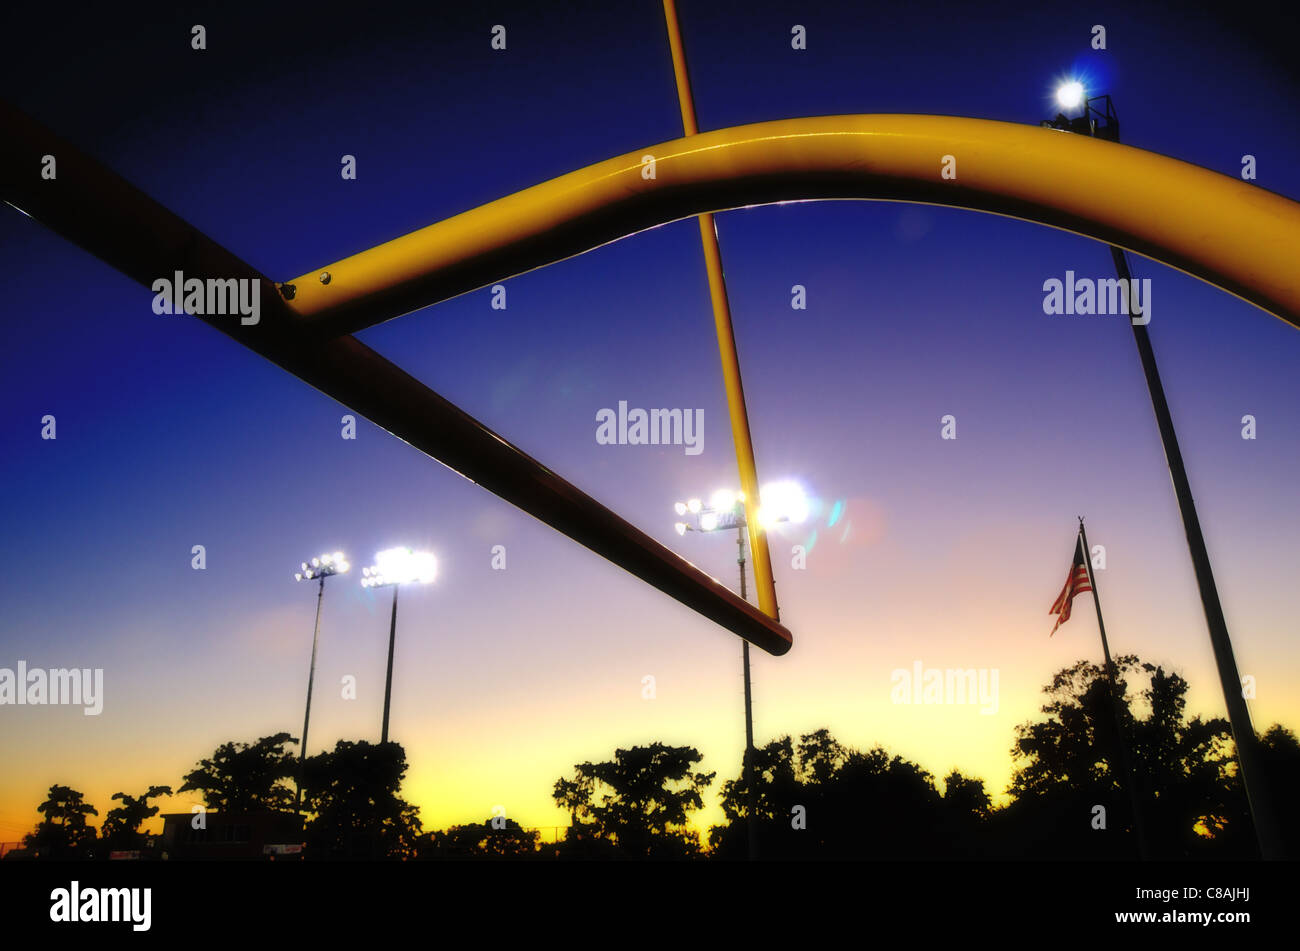 American football goalpost at dusk, with silhouetted tree line and US flag Stock Photo